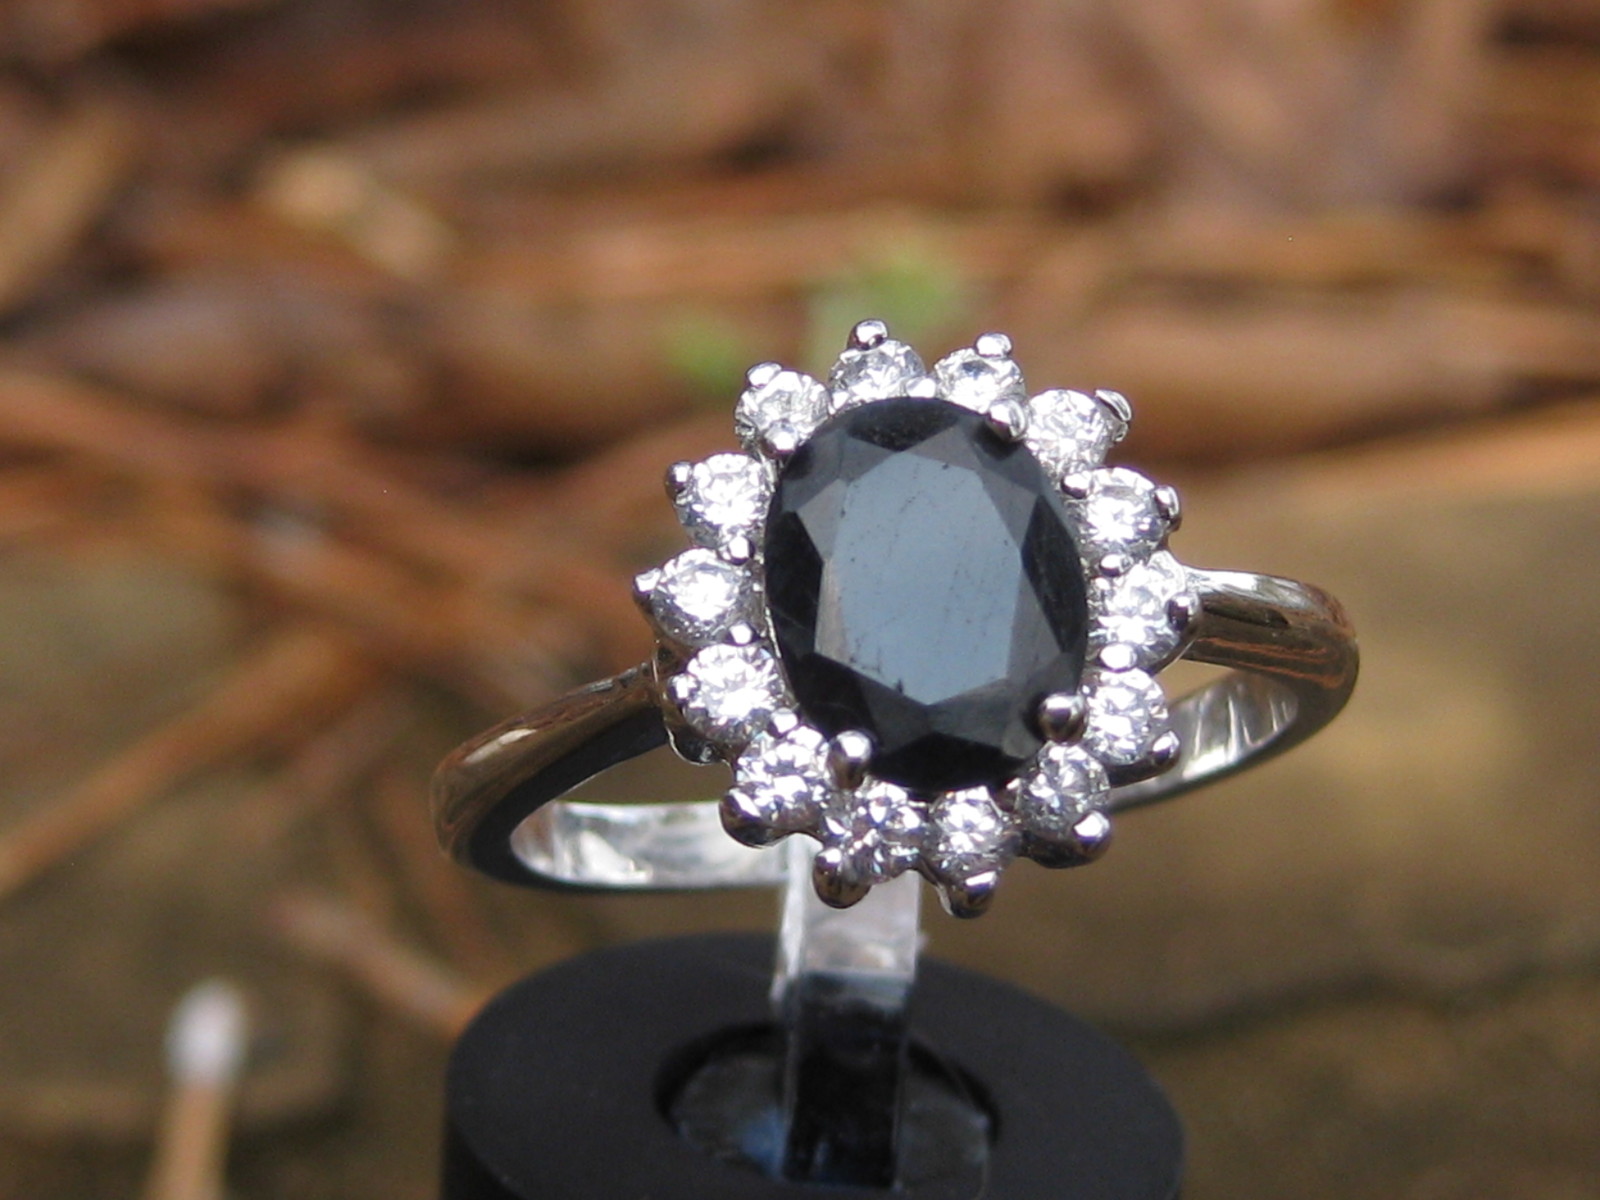 Moonstar7spirits haunted ring of the 9 Muses spectacular METAPHYSICAL OFFERING - $90.00